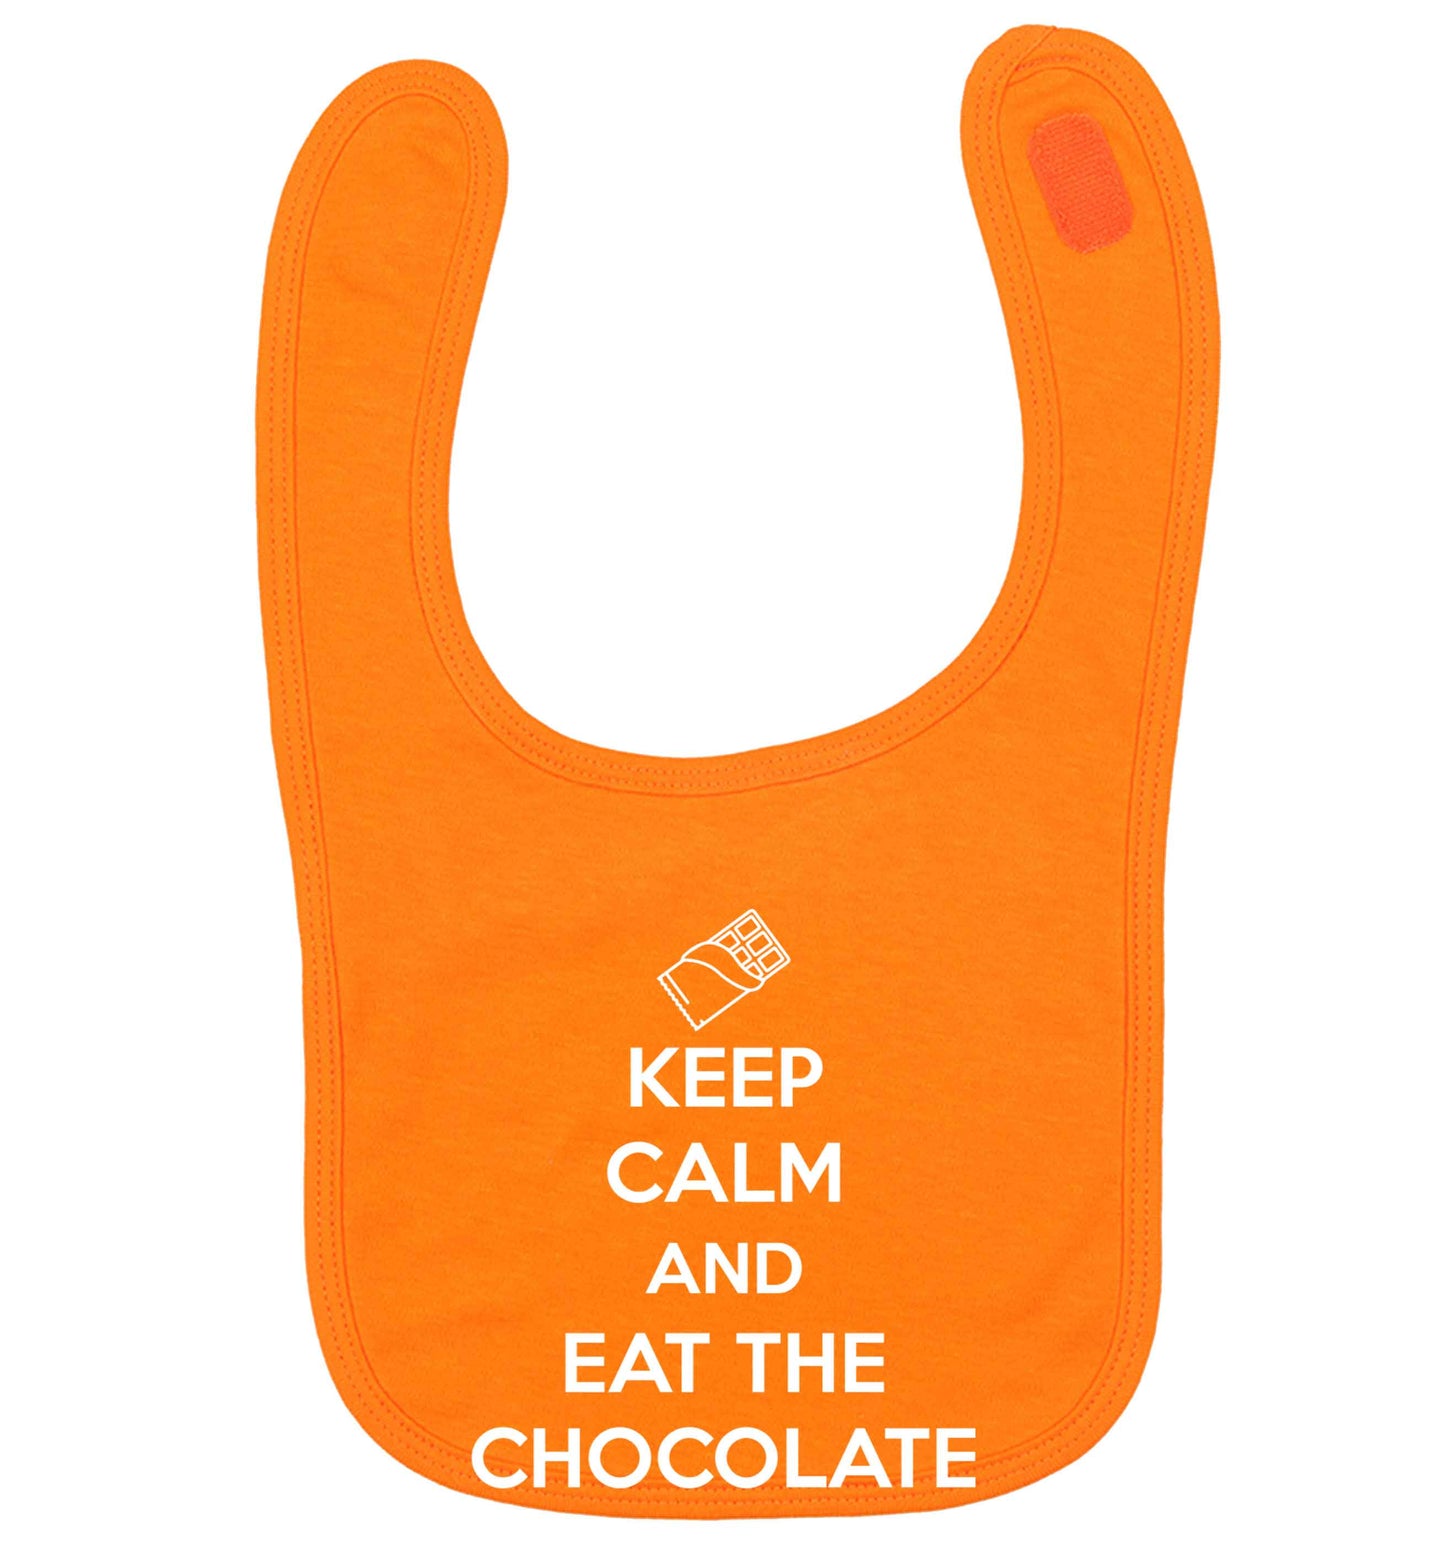 funny gift for a chocaholic! Keep calm and eat the chocolate orange baby bib